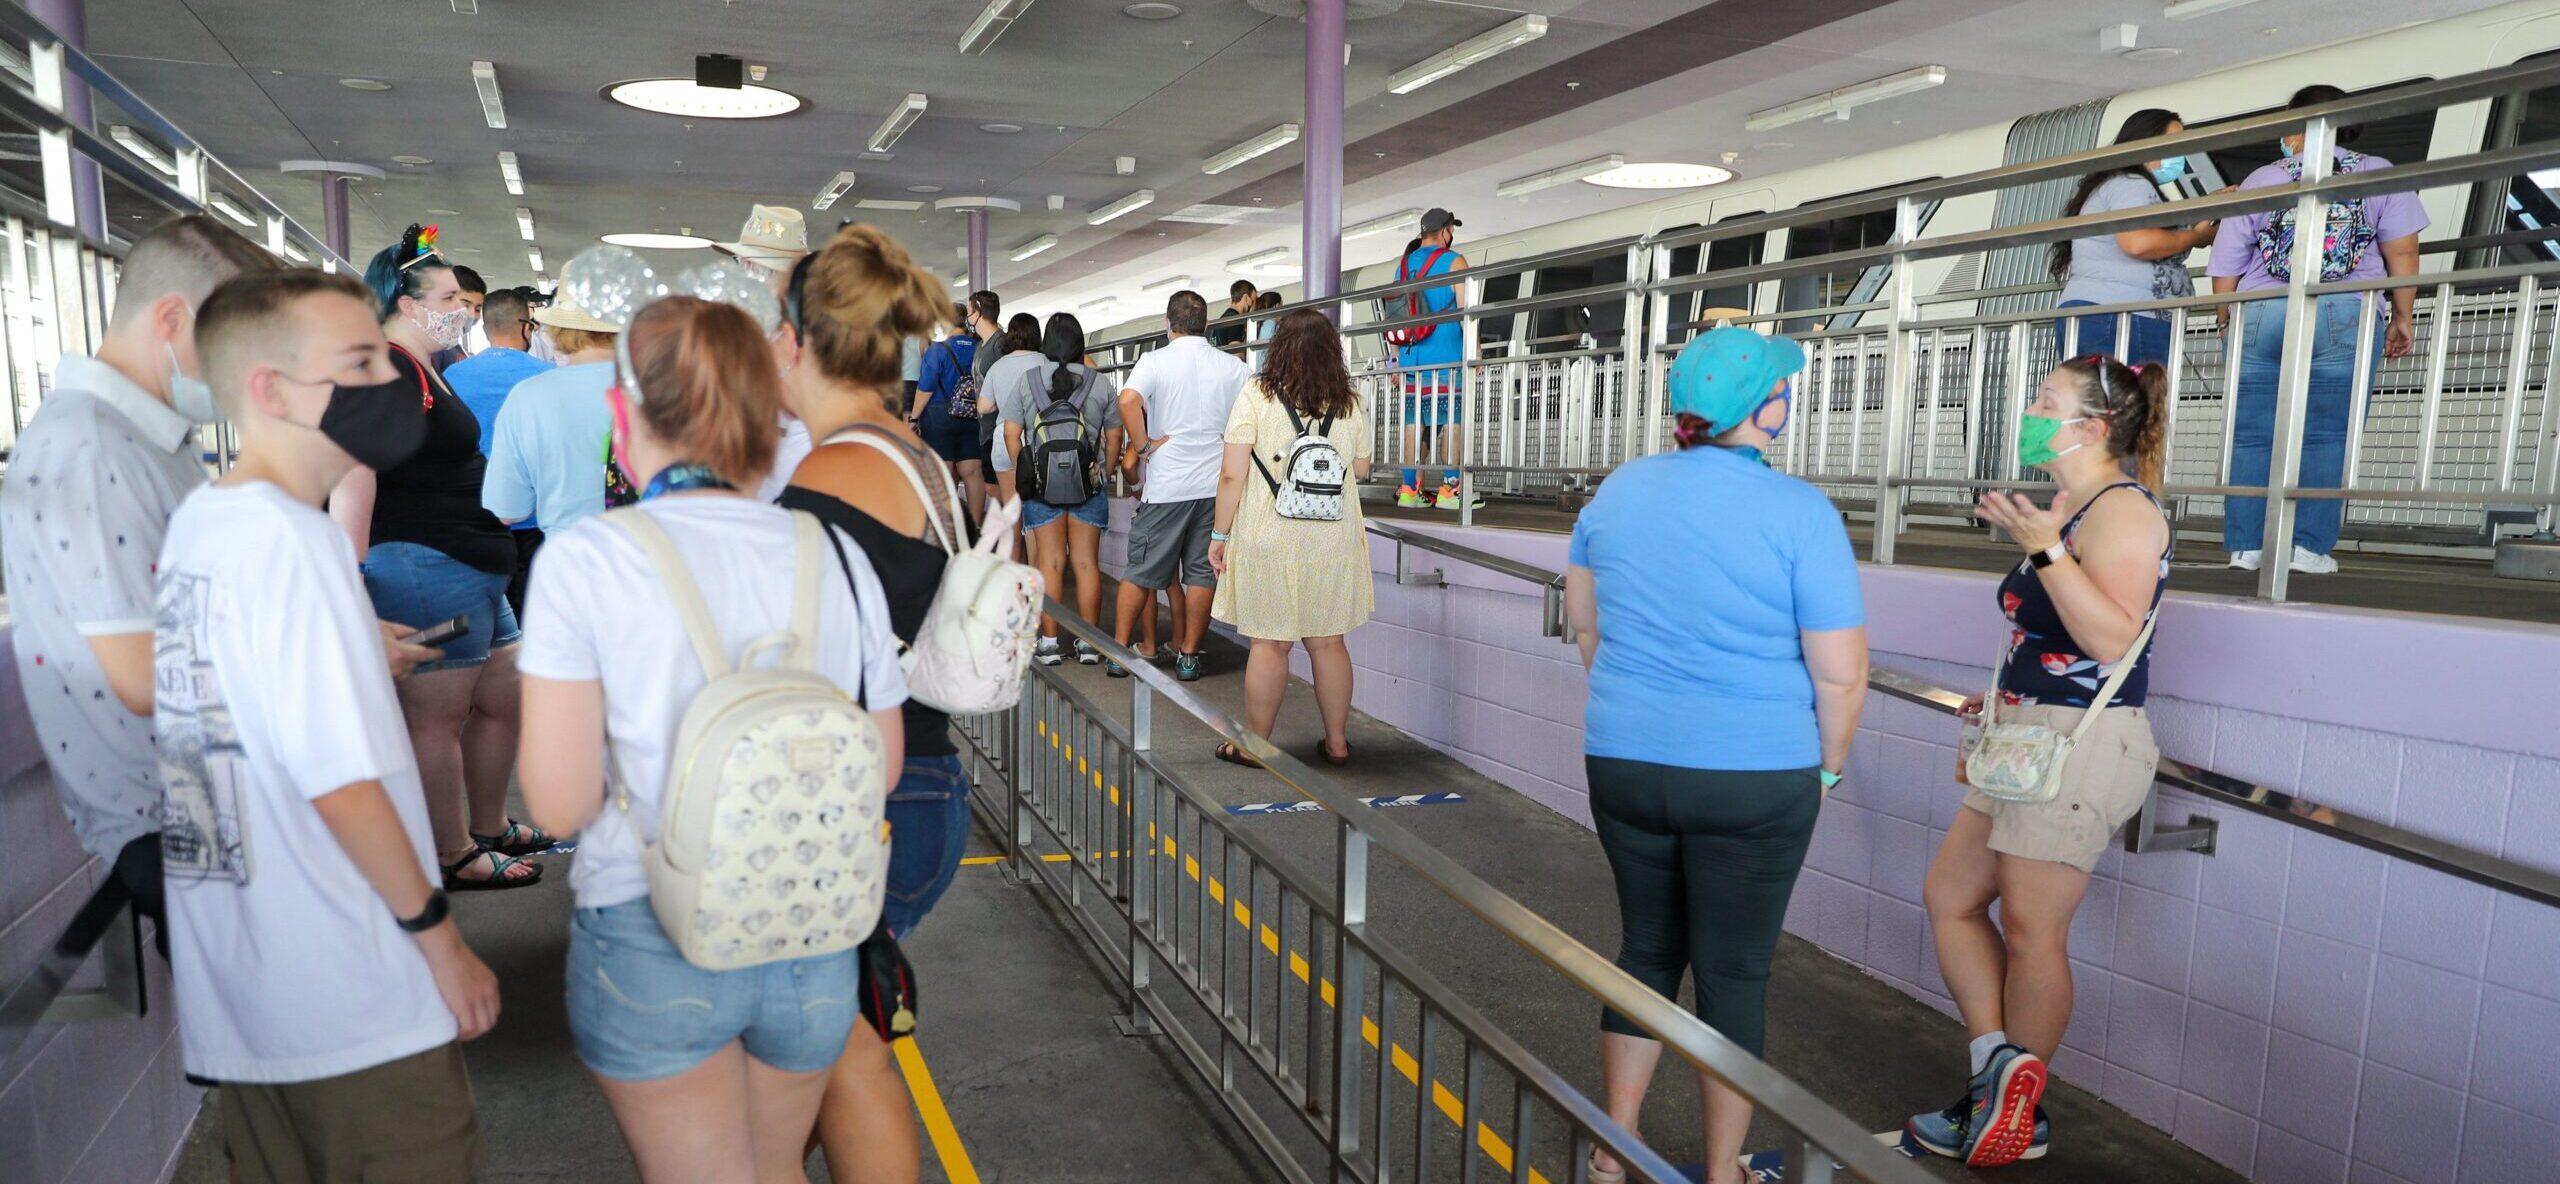 Woman Files Lawsuit Against Disney After Being Stuck In Monorail